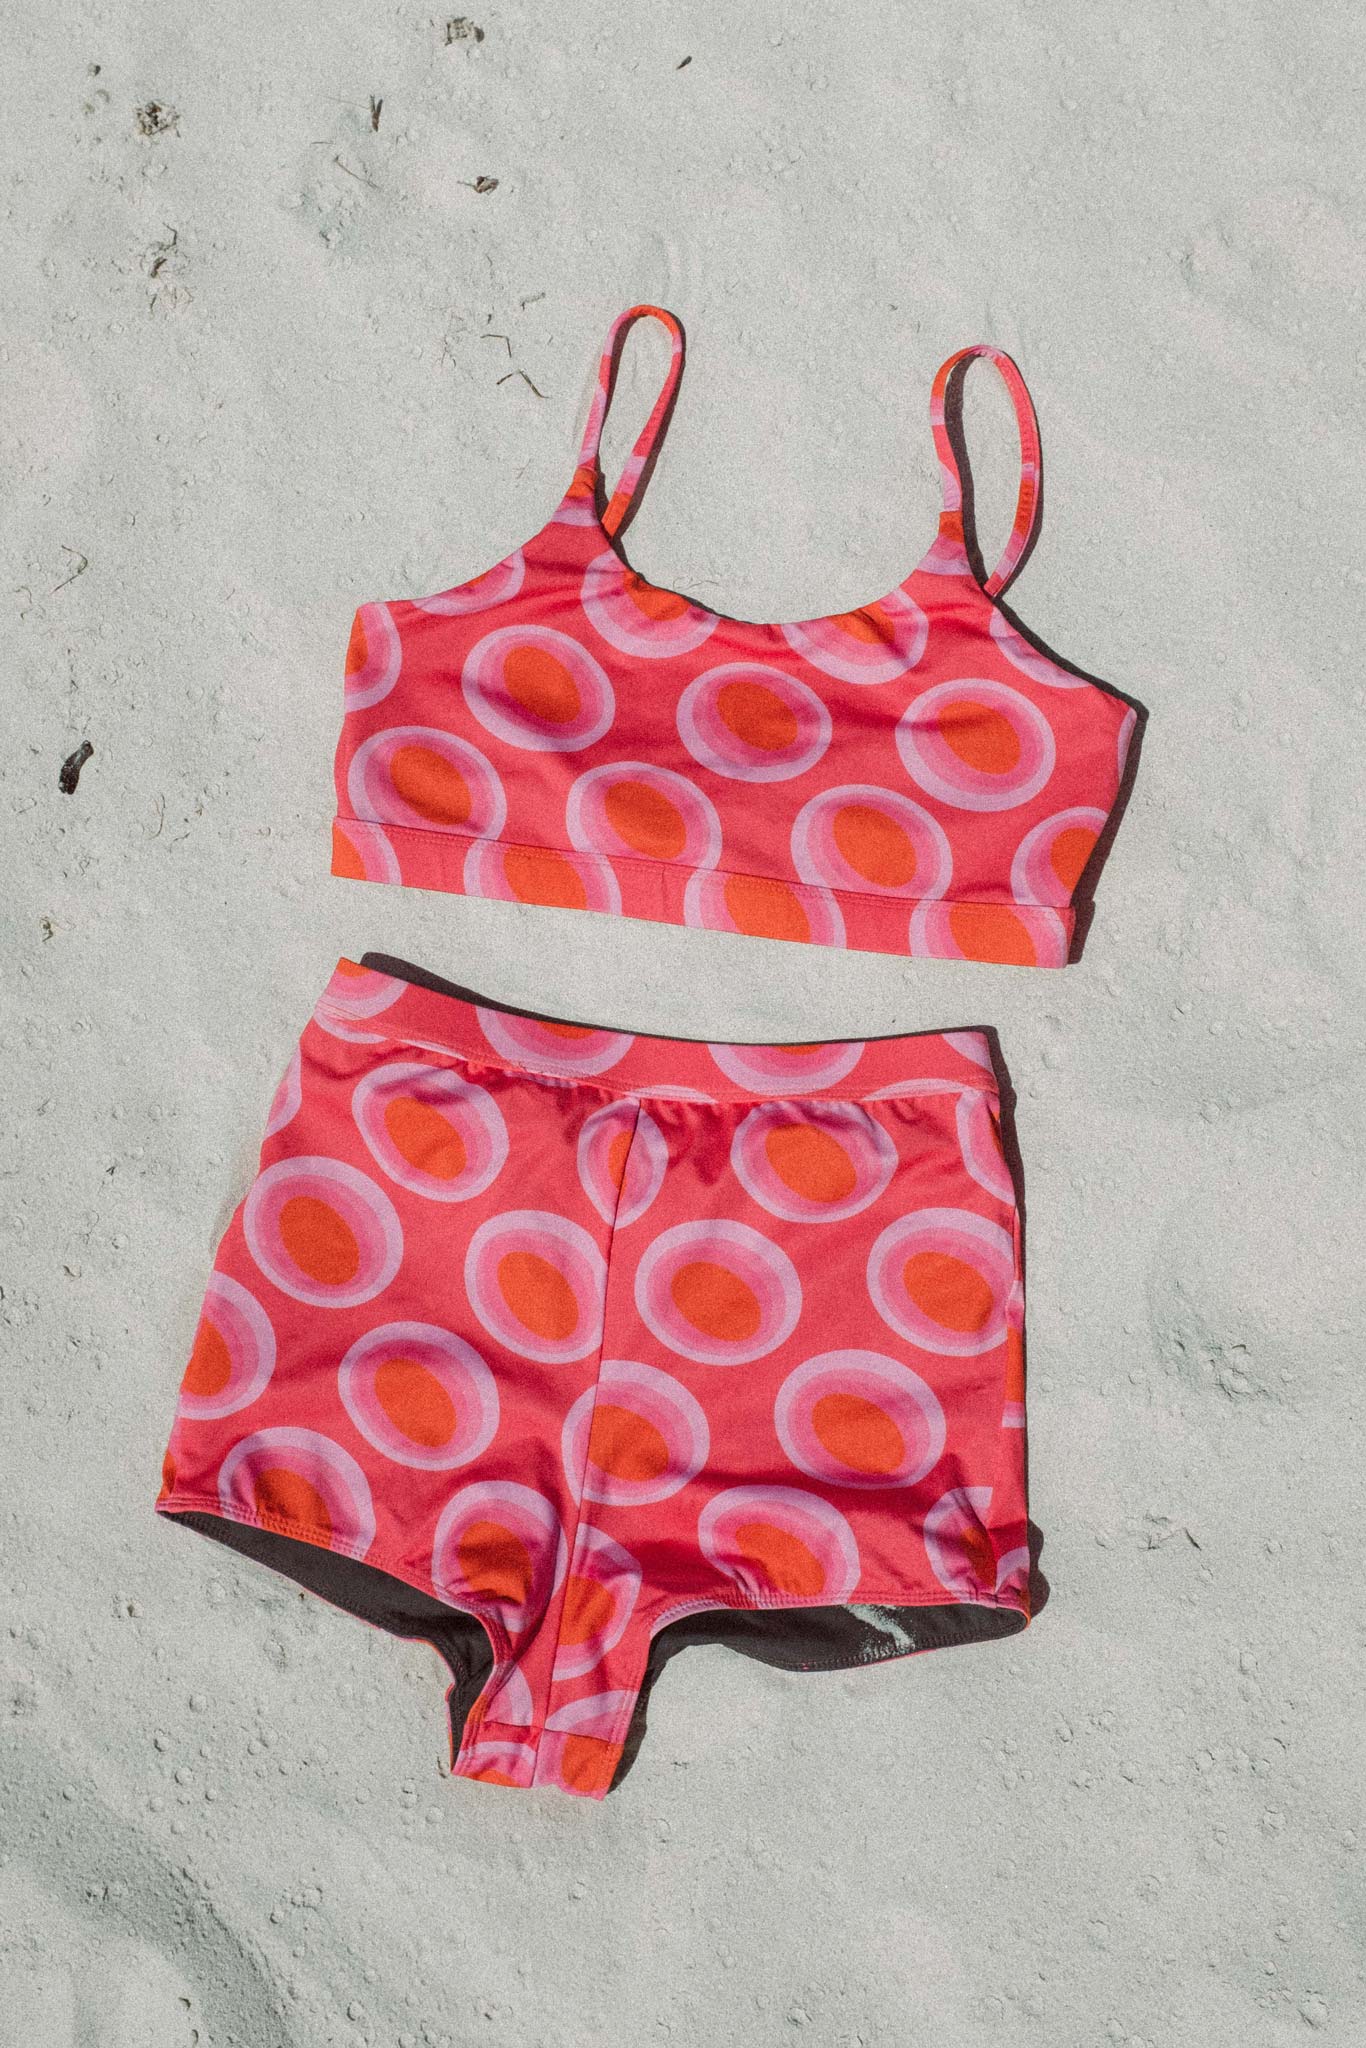 flatlay of the watermelon print surf bikini view from the front on the beach